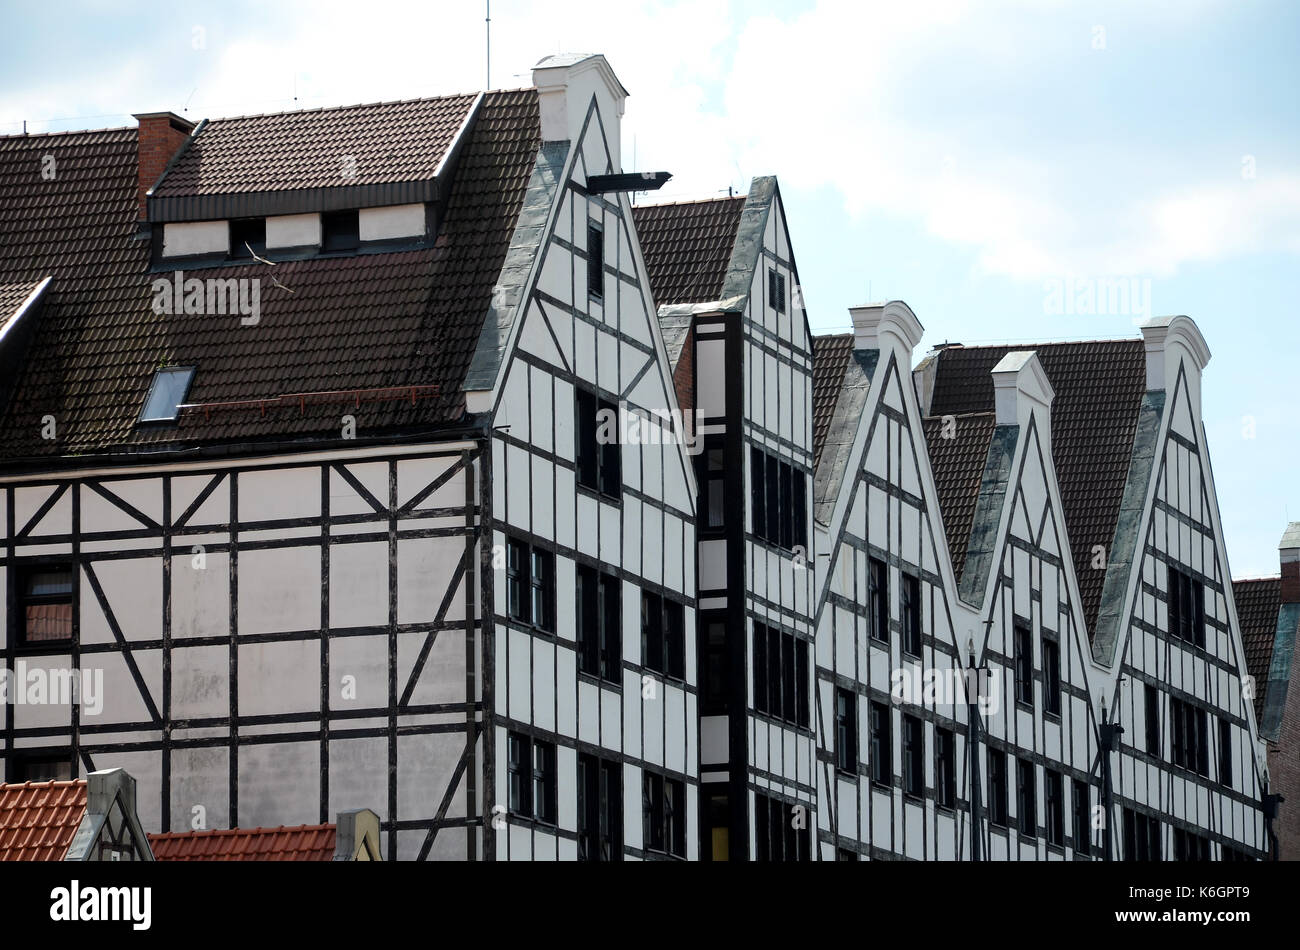 Buildings of the timber framing in Gdansk, Poland Stock Photo